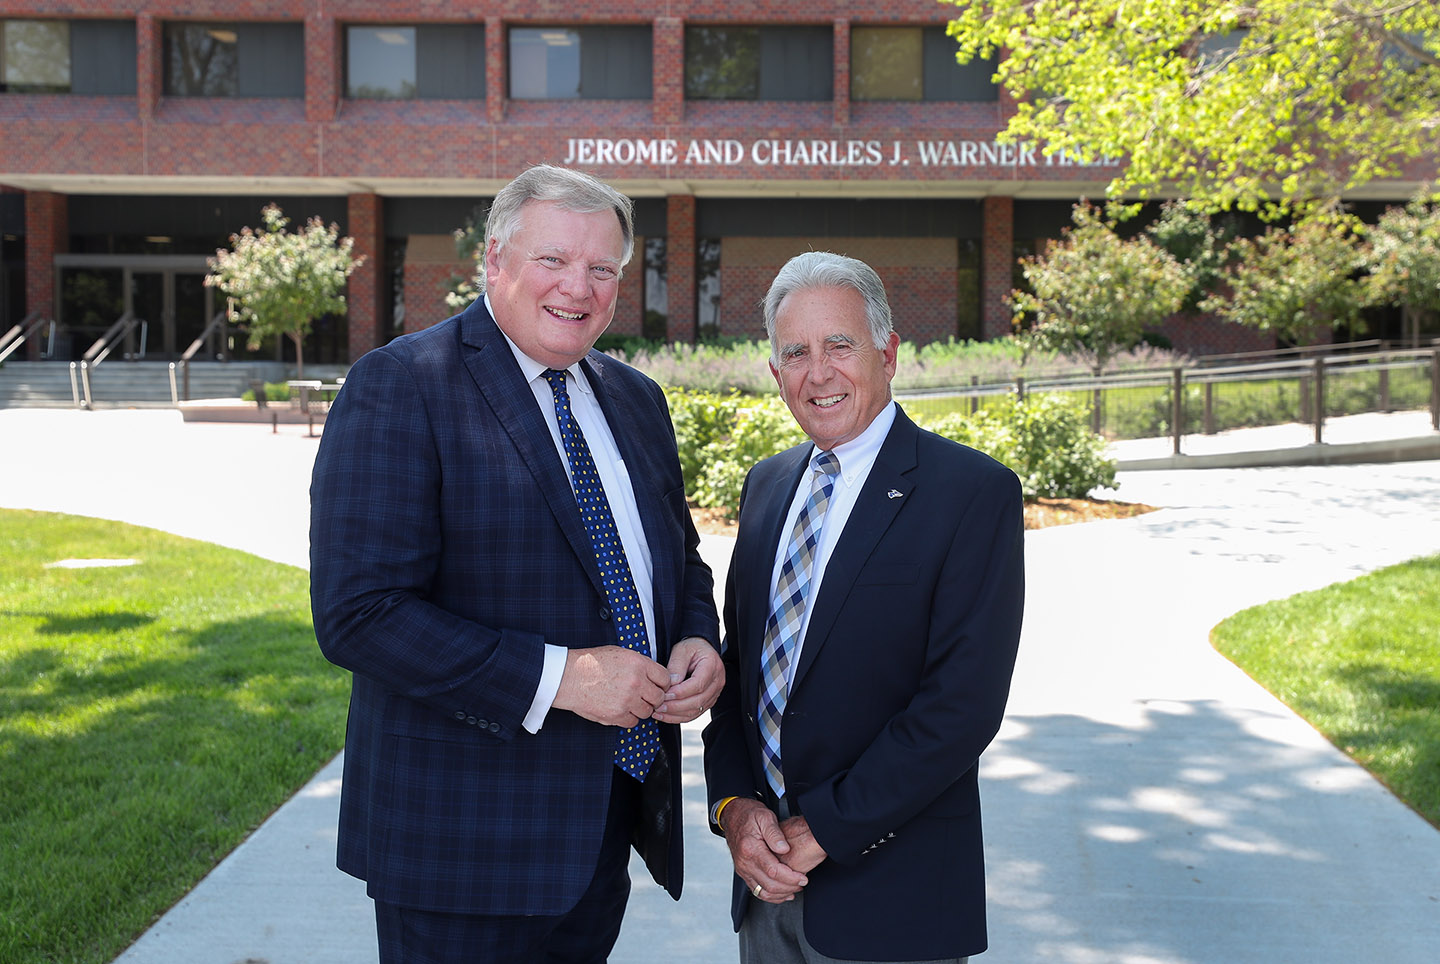 Doug Kristensen and Pete Kotsiopulos are pictured in front of Warner Hall on the UNK campus. The building is named after Charles J. Warner and his son Jerome Warner, two prominent former state senators who played a significant role in UNK’s history.